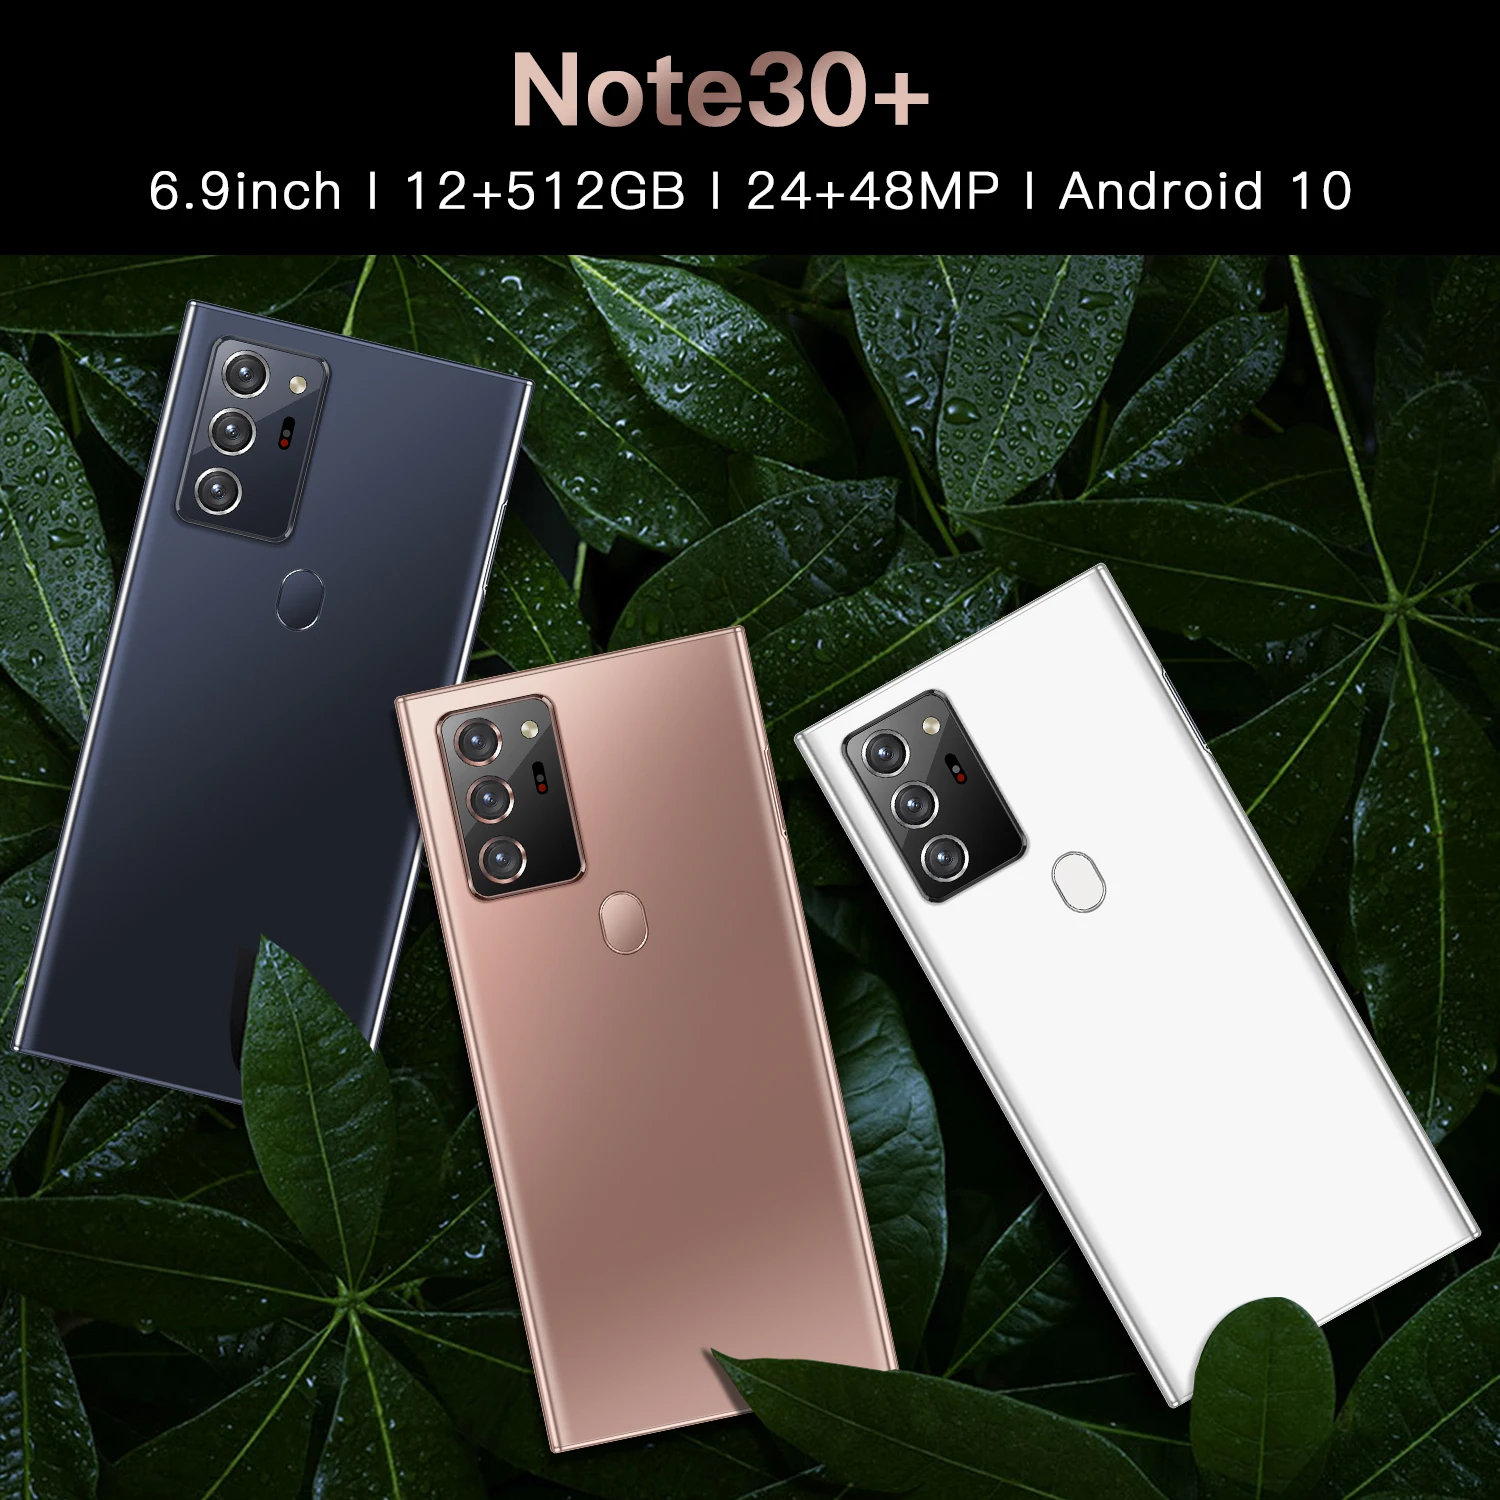 

2021 Global Version Galax Note30+ Smart Phone 6.9inch 12GB 512GB Snapdragon 865 Android 10.0 Fingerprint Unlock Cellphone